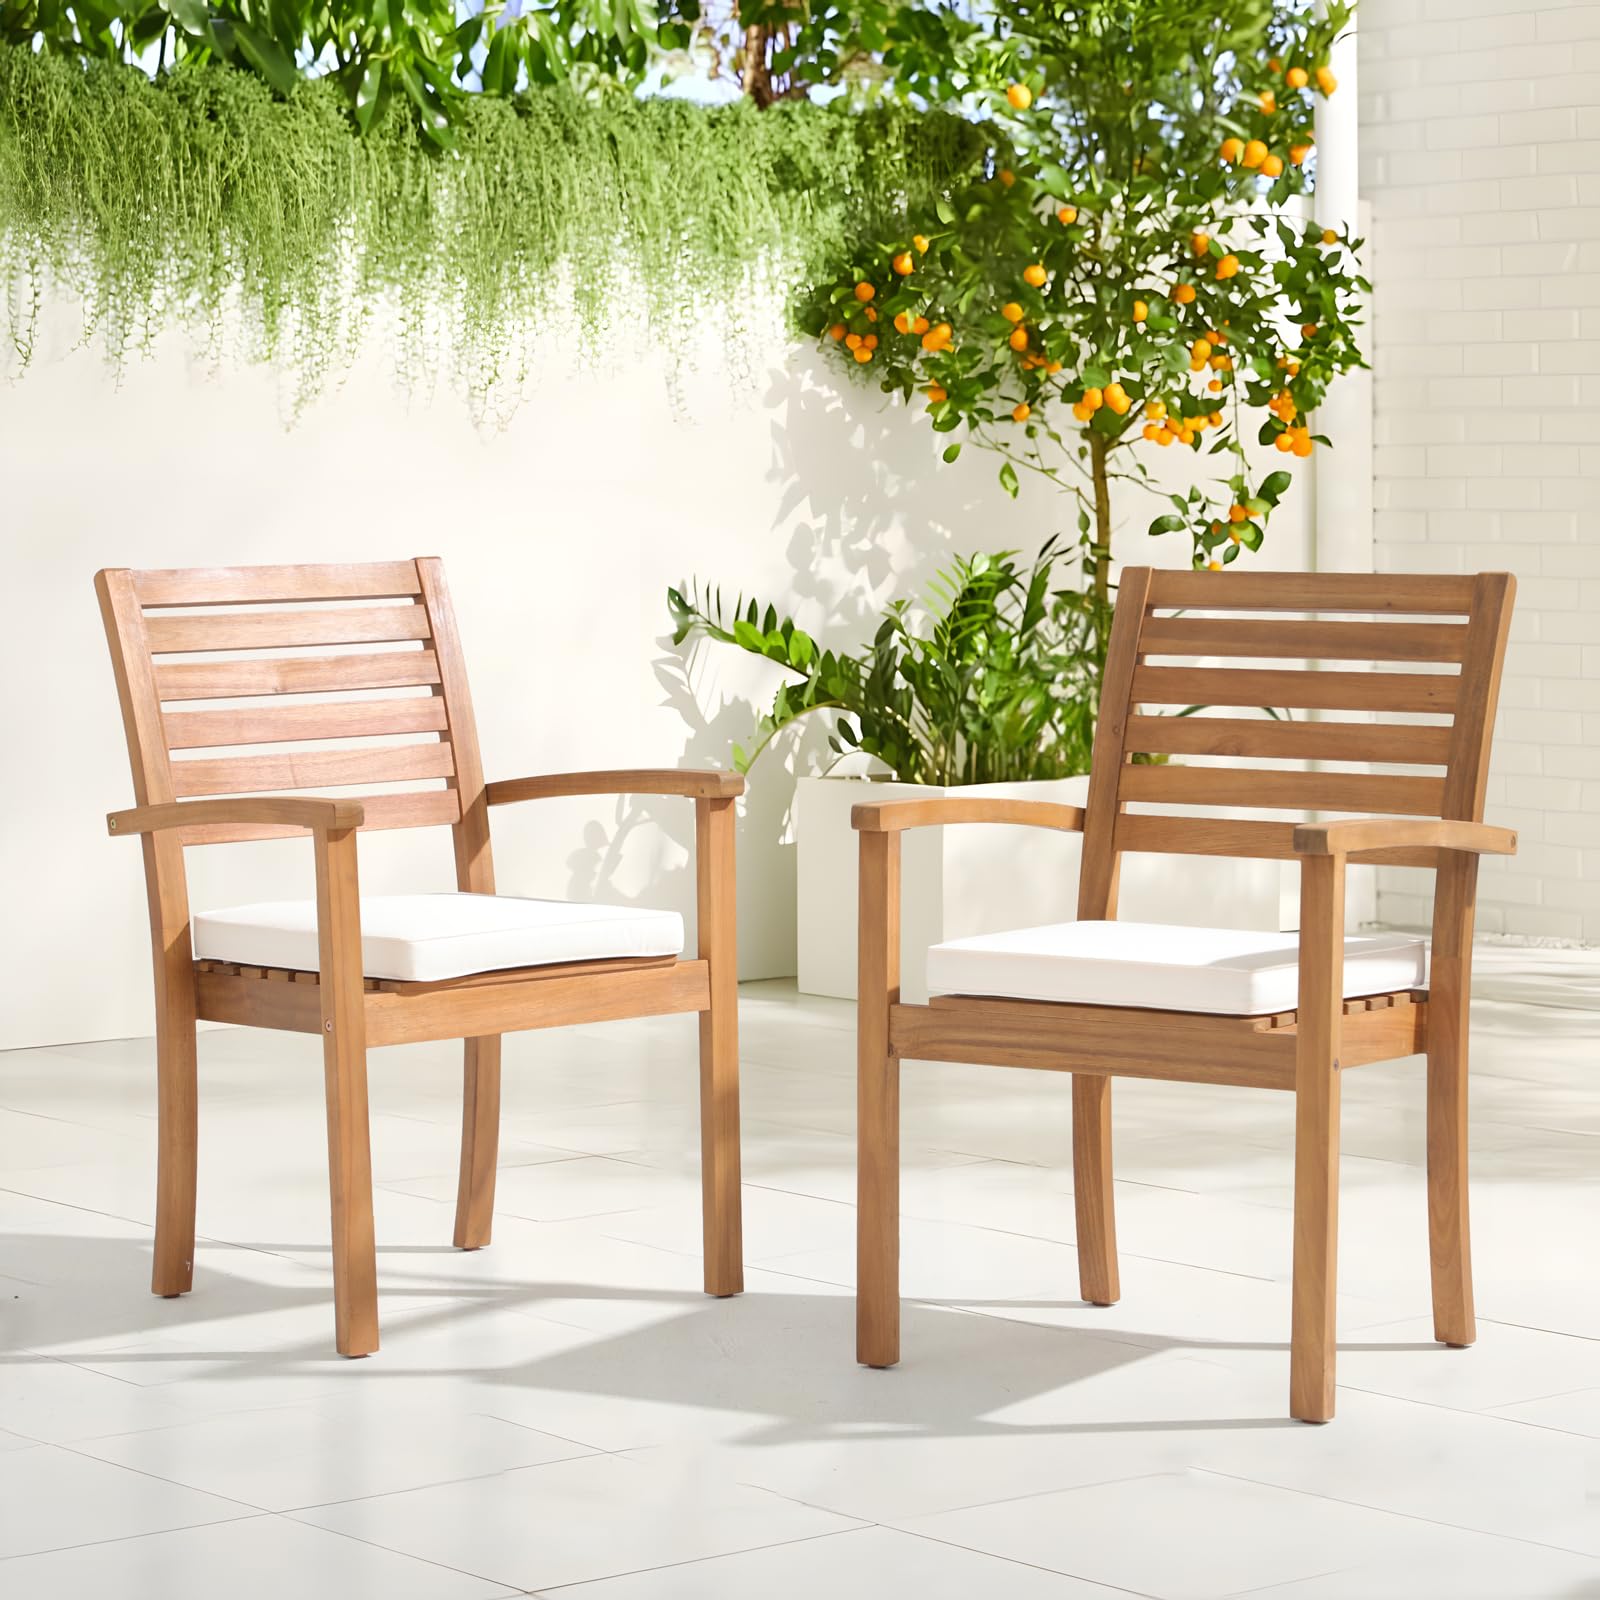 Outdoor Acacia Wooden Chairs,Stackable Patio Dining Chairs